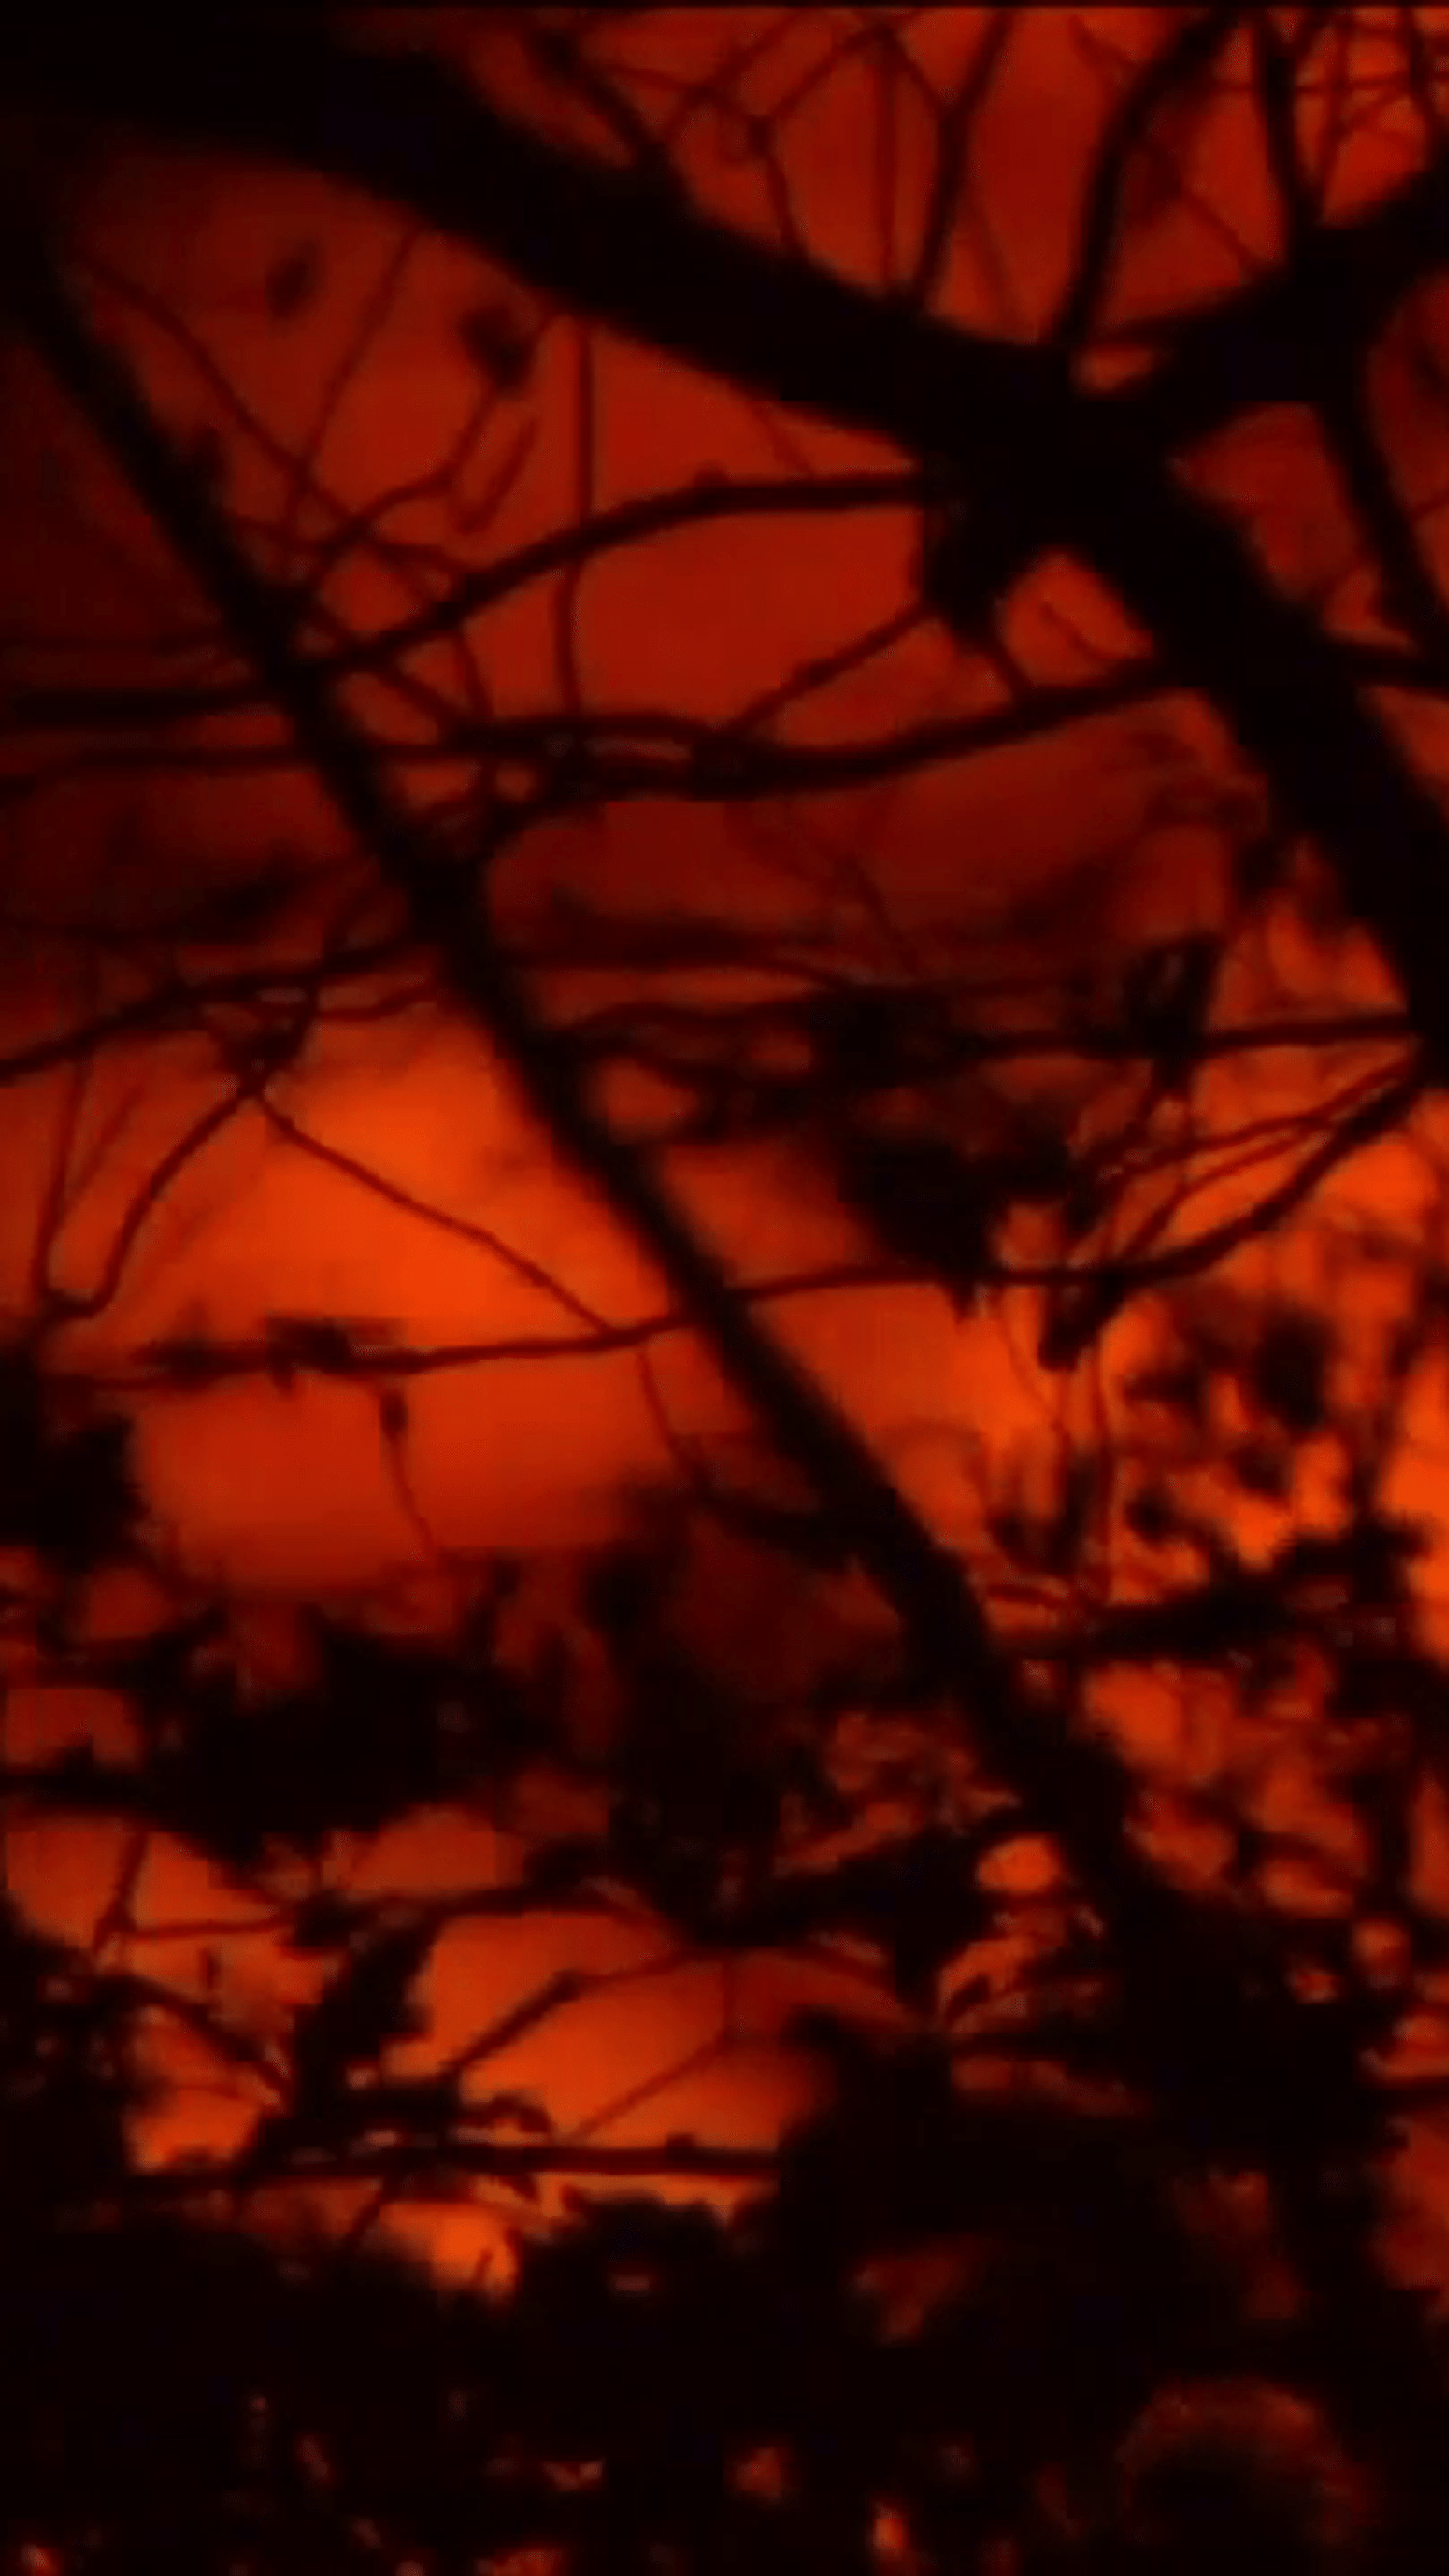 A photo of a red sky with tree branches in the foreground. - Dark orange